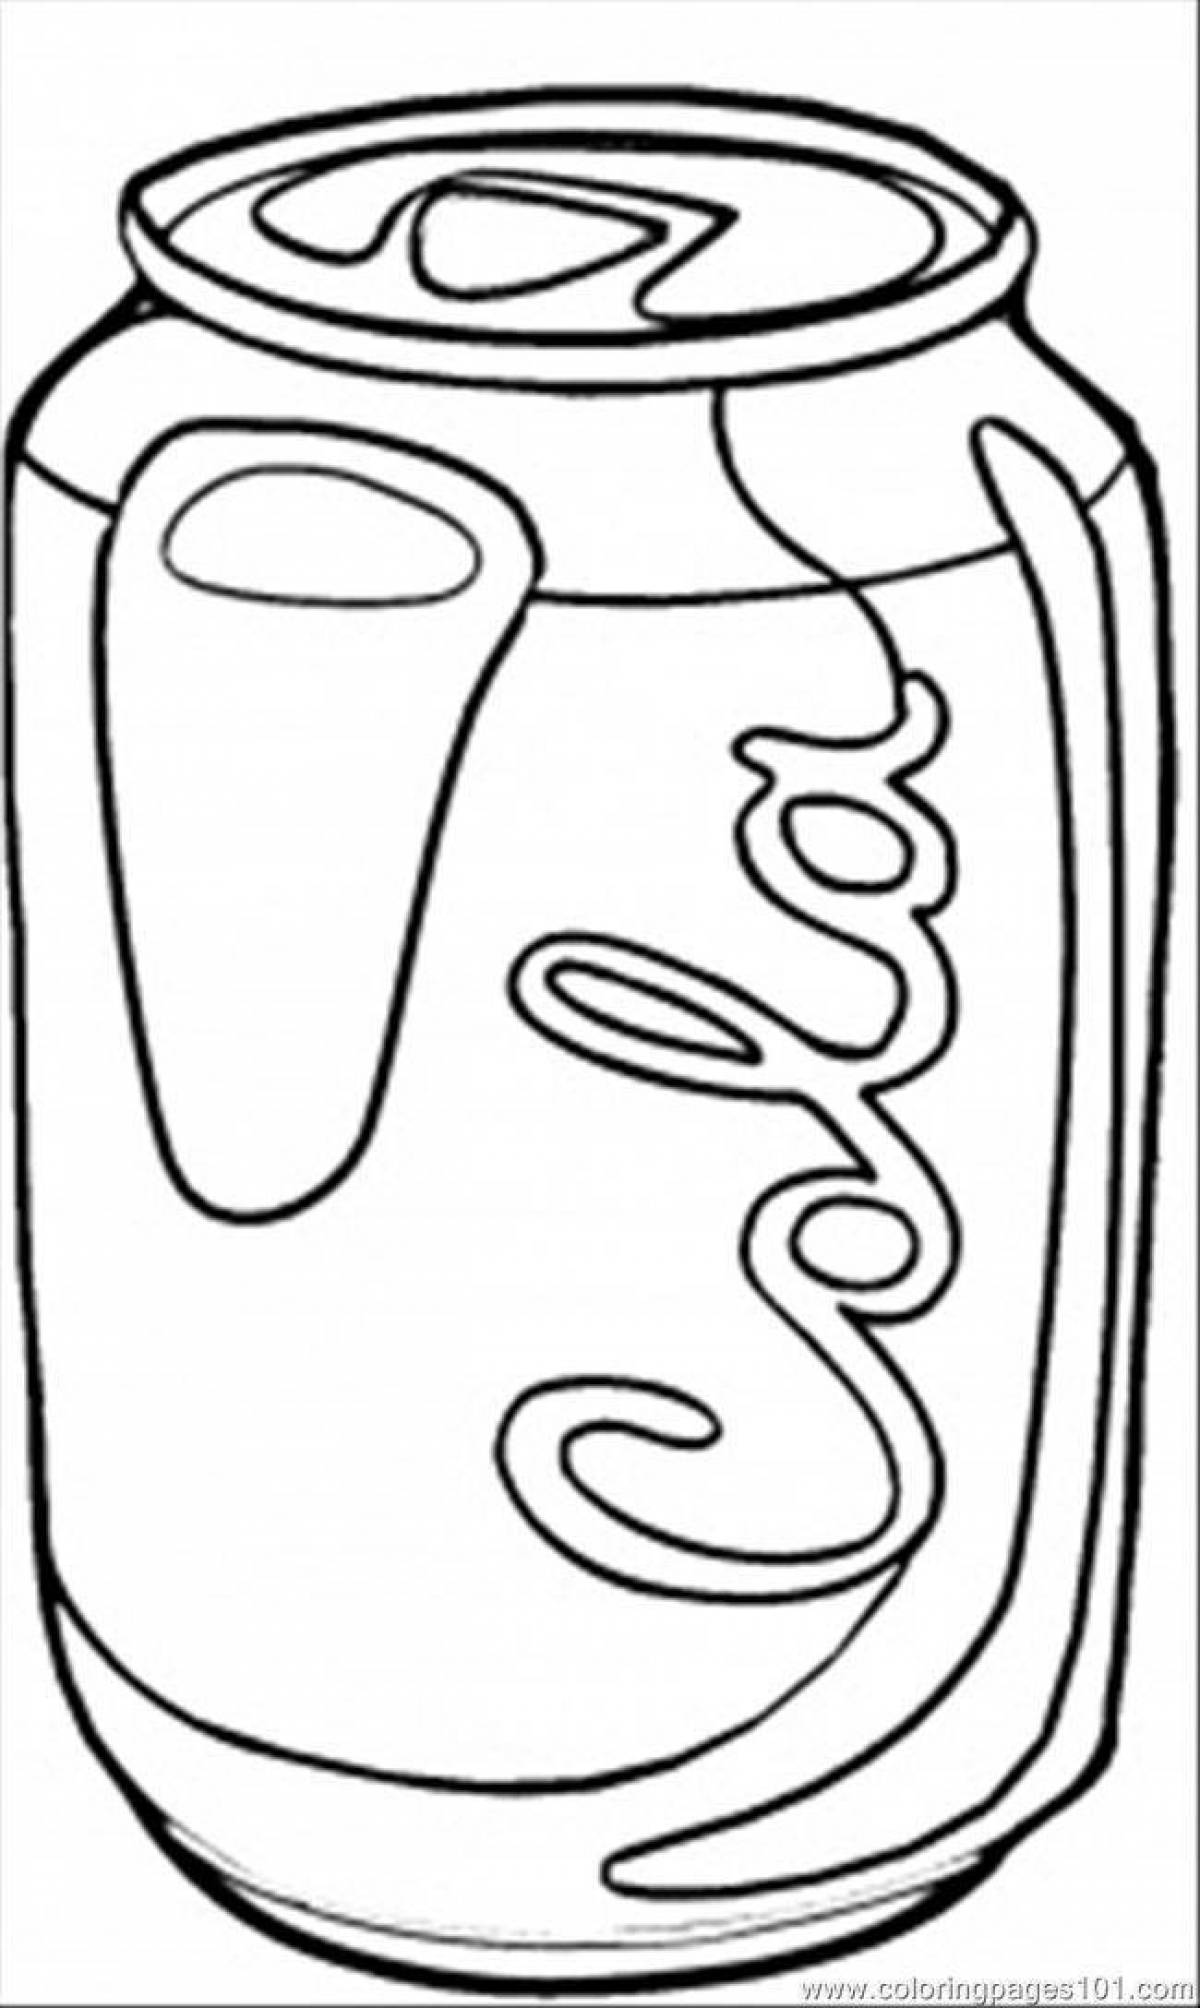 Animated cola coloring page